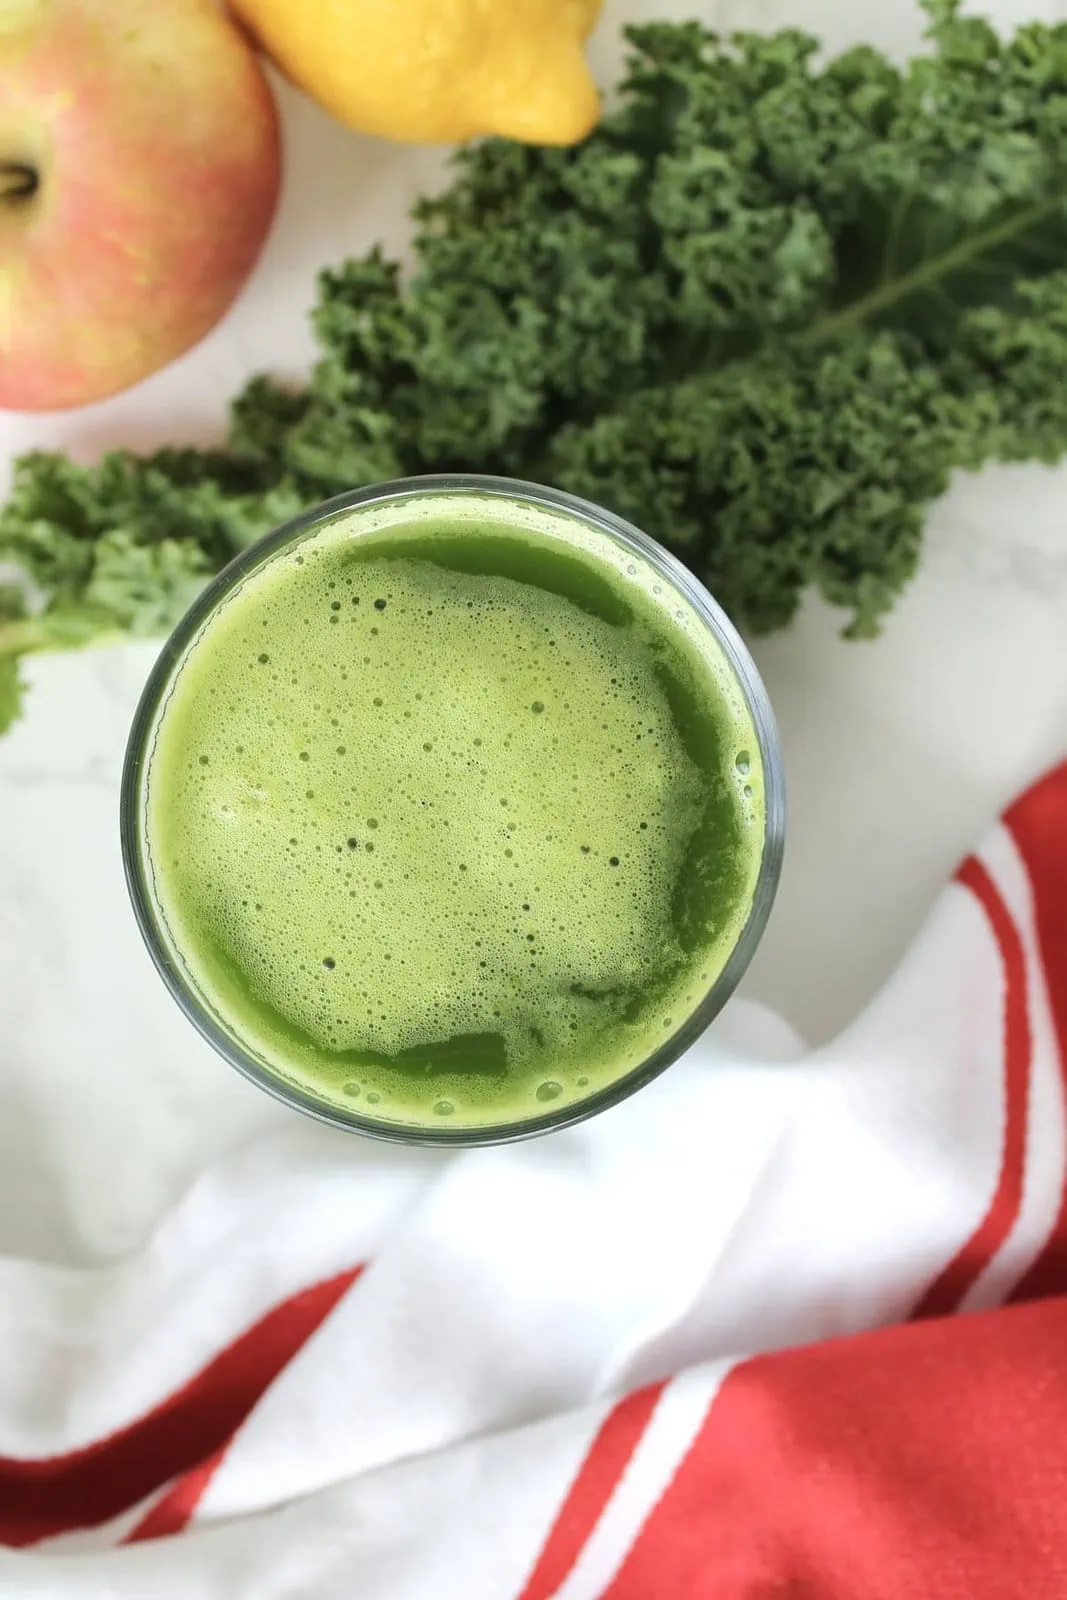 A glass of first watch kale tonic green juice with apples and kale.